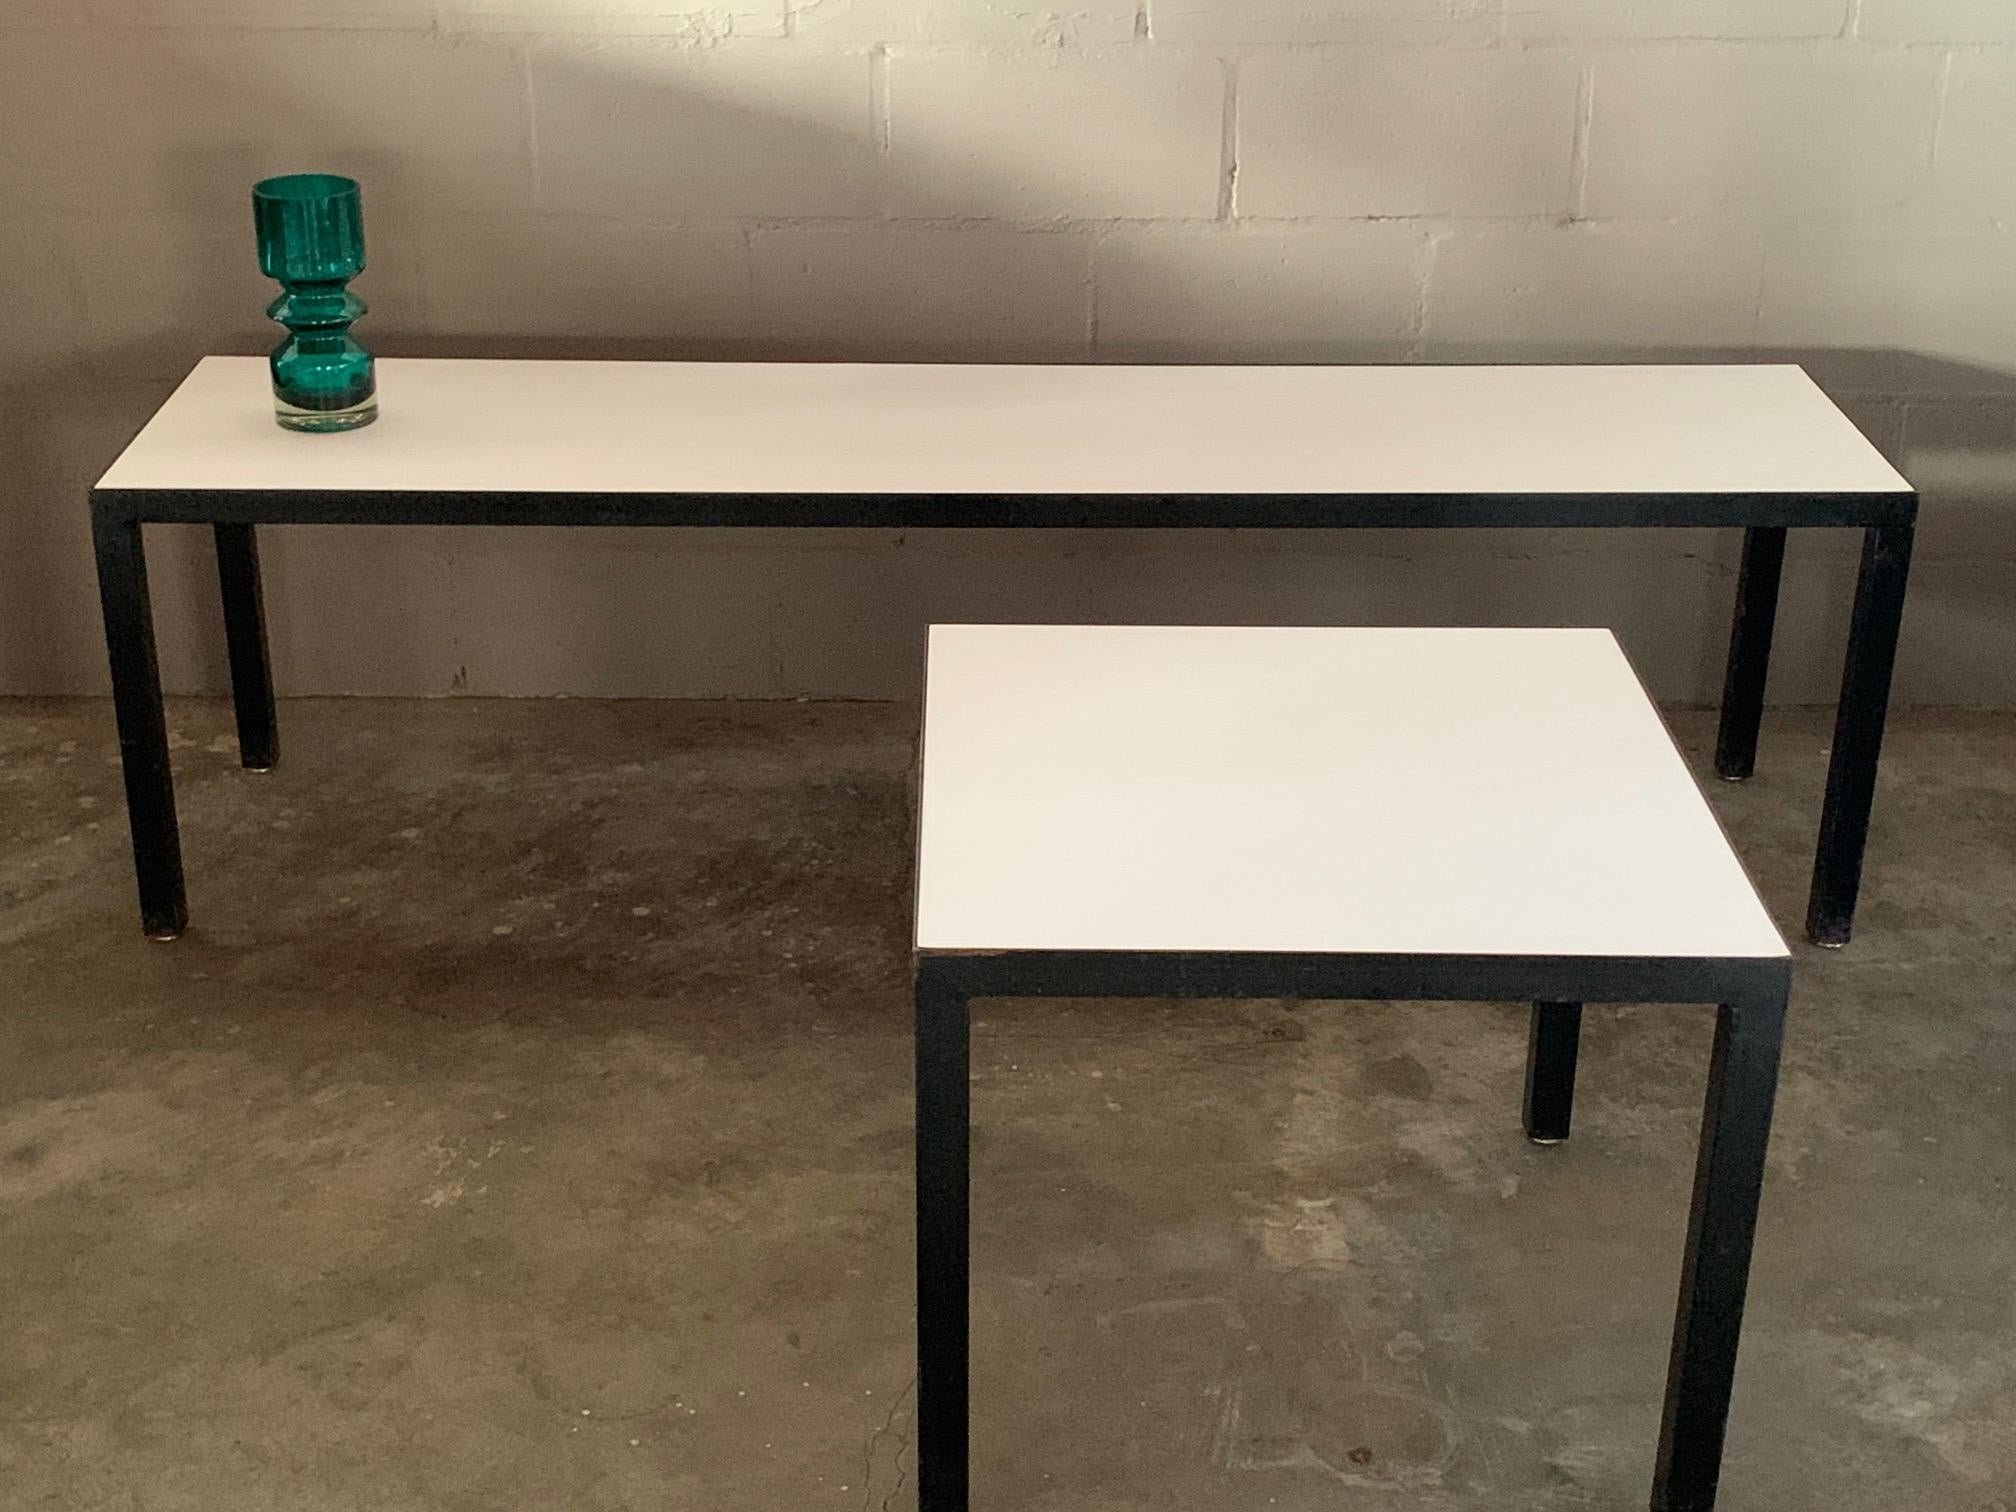 A Classic, Minimalist bench or coffee table and matching side table by JG Furniture, NYC. Black steel with white Formica tops give it a simple and timeless look. The long table measures 18